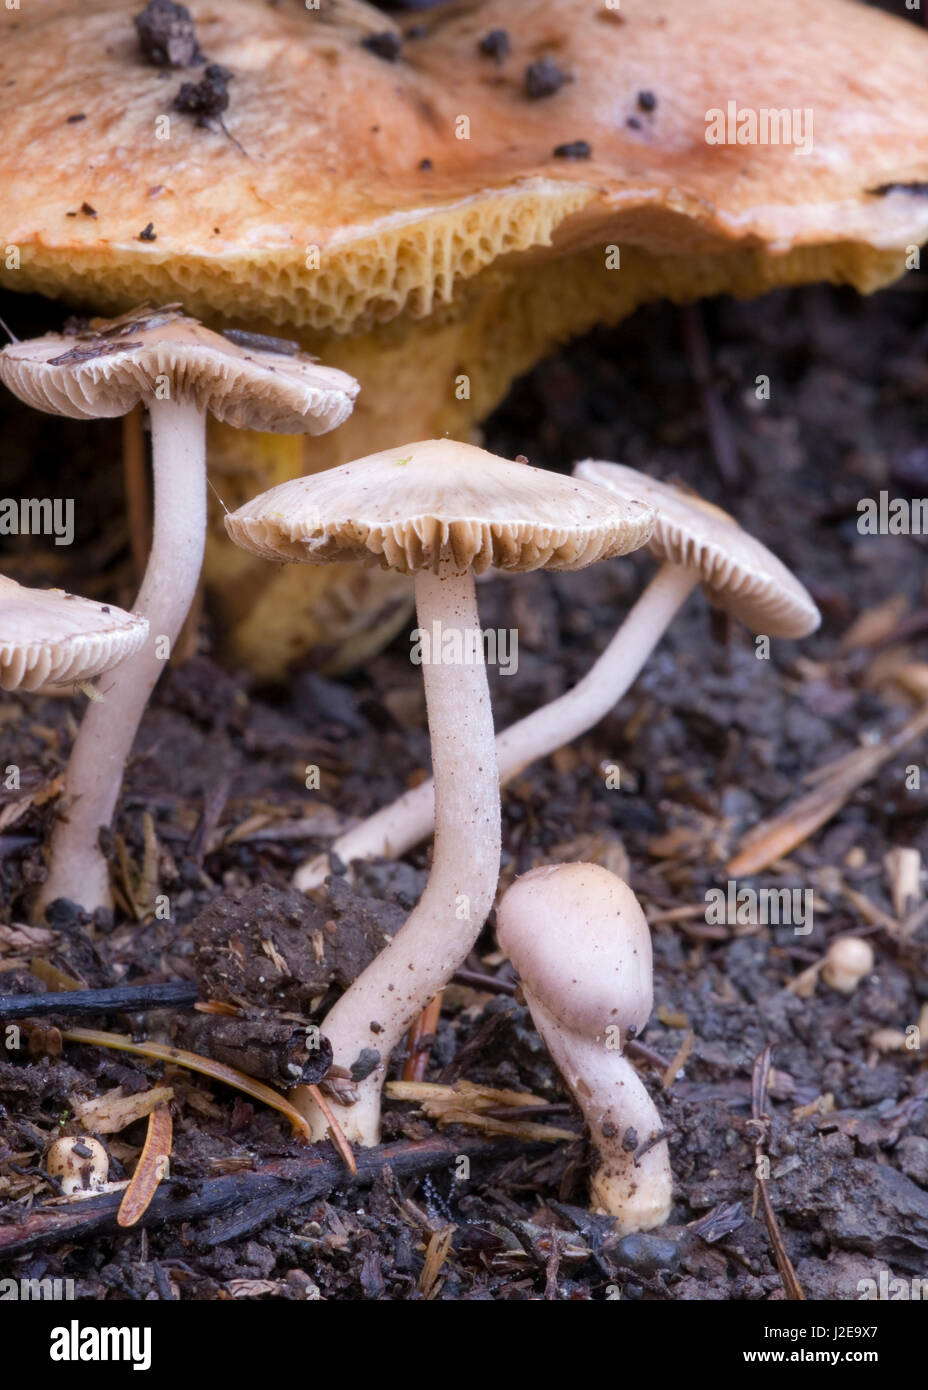 Canada, British Columbia, Vancouver. Small gilled mushrooms coming up through the soil Stock Photo